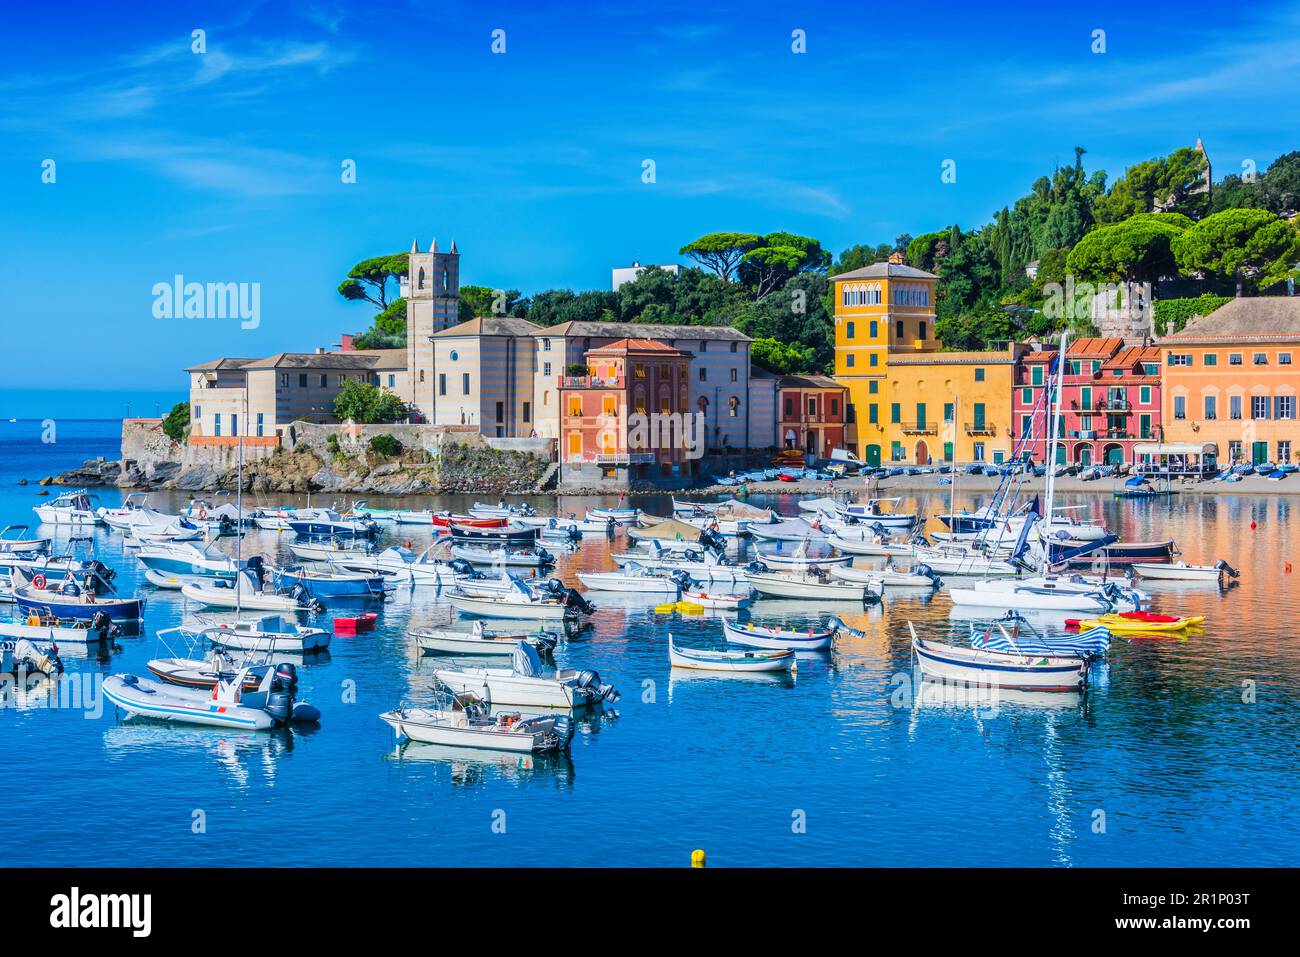 View of the Bay of Silence in Sestri Levante, Liguria, Italy Stock Photo